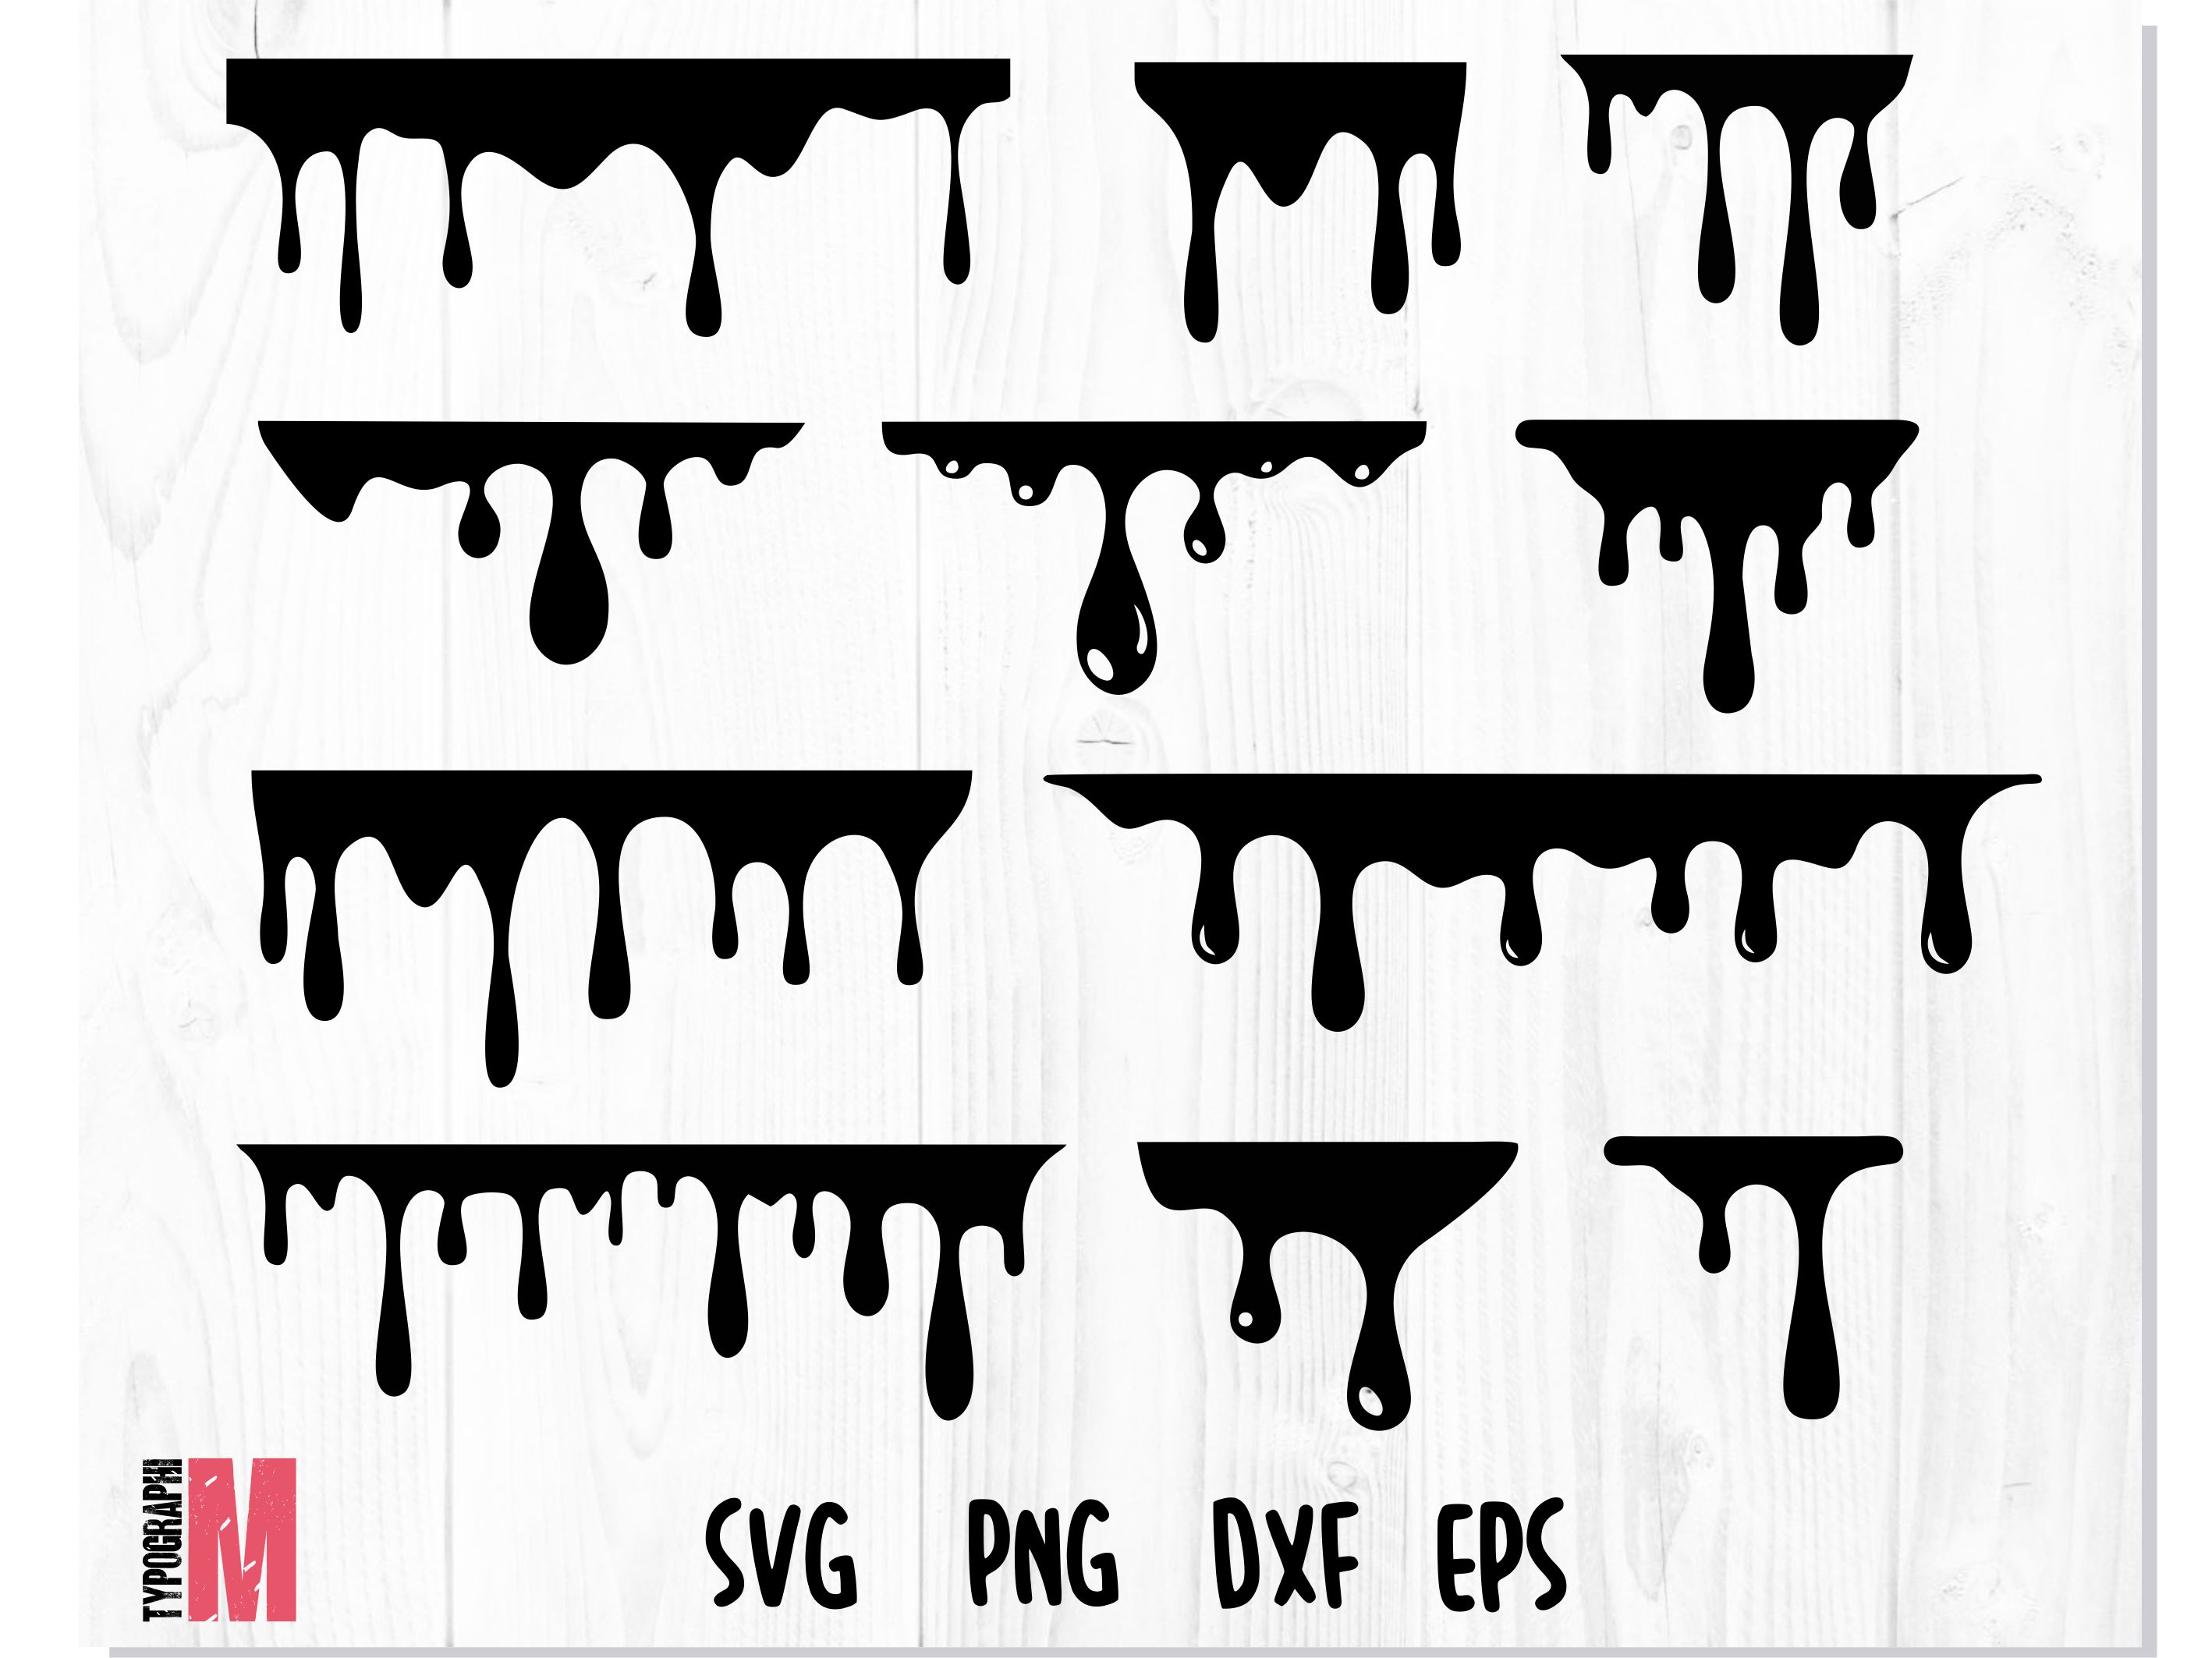 Download Dripping Borders Svg Dripping Borders Svg Bundle Dripping Borders Svg Cut Files Dripping Borders Set Vector Files Dripping Borders Svg Files Cricut Vectorency